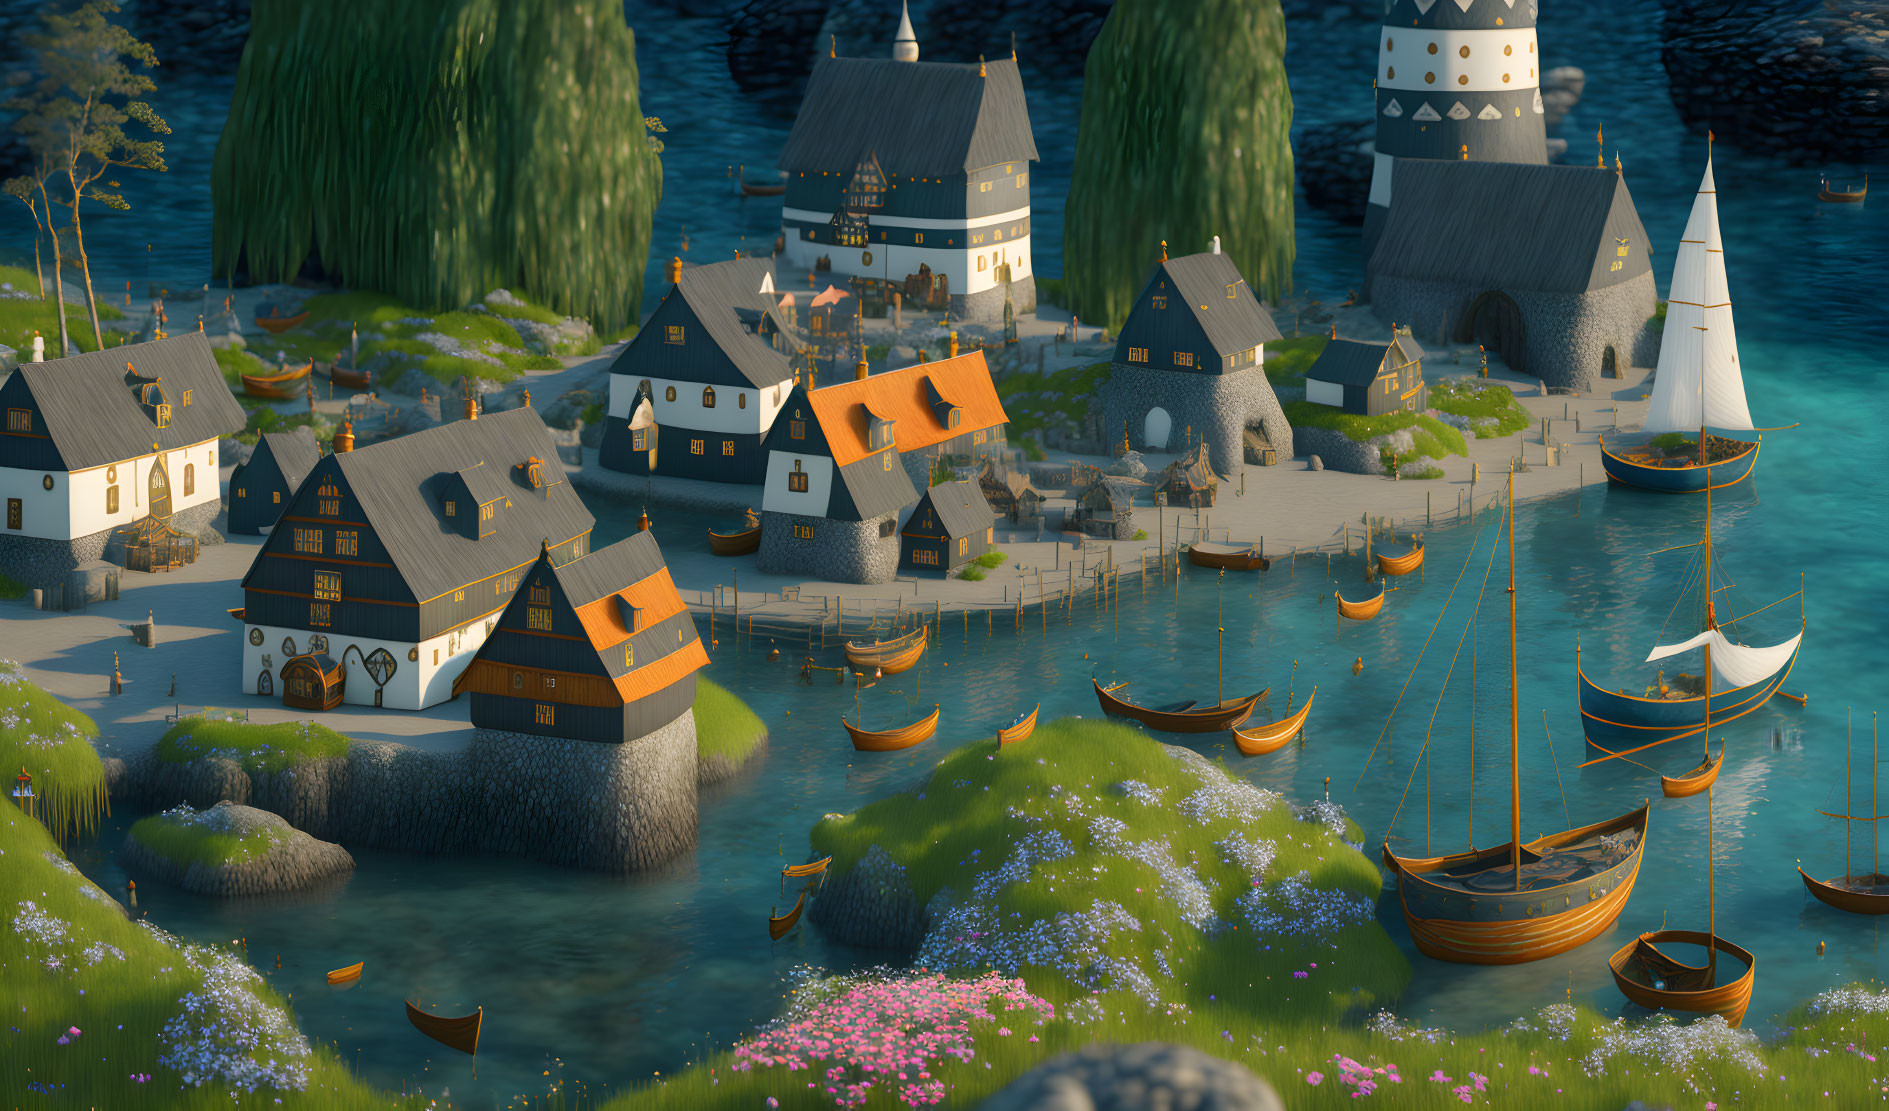 Traditional coastal village with windmill, boats, and verdant hills